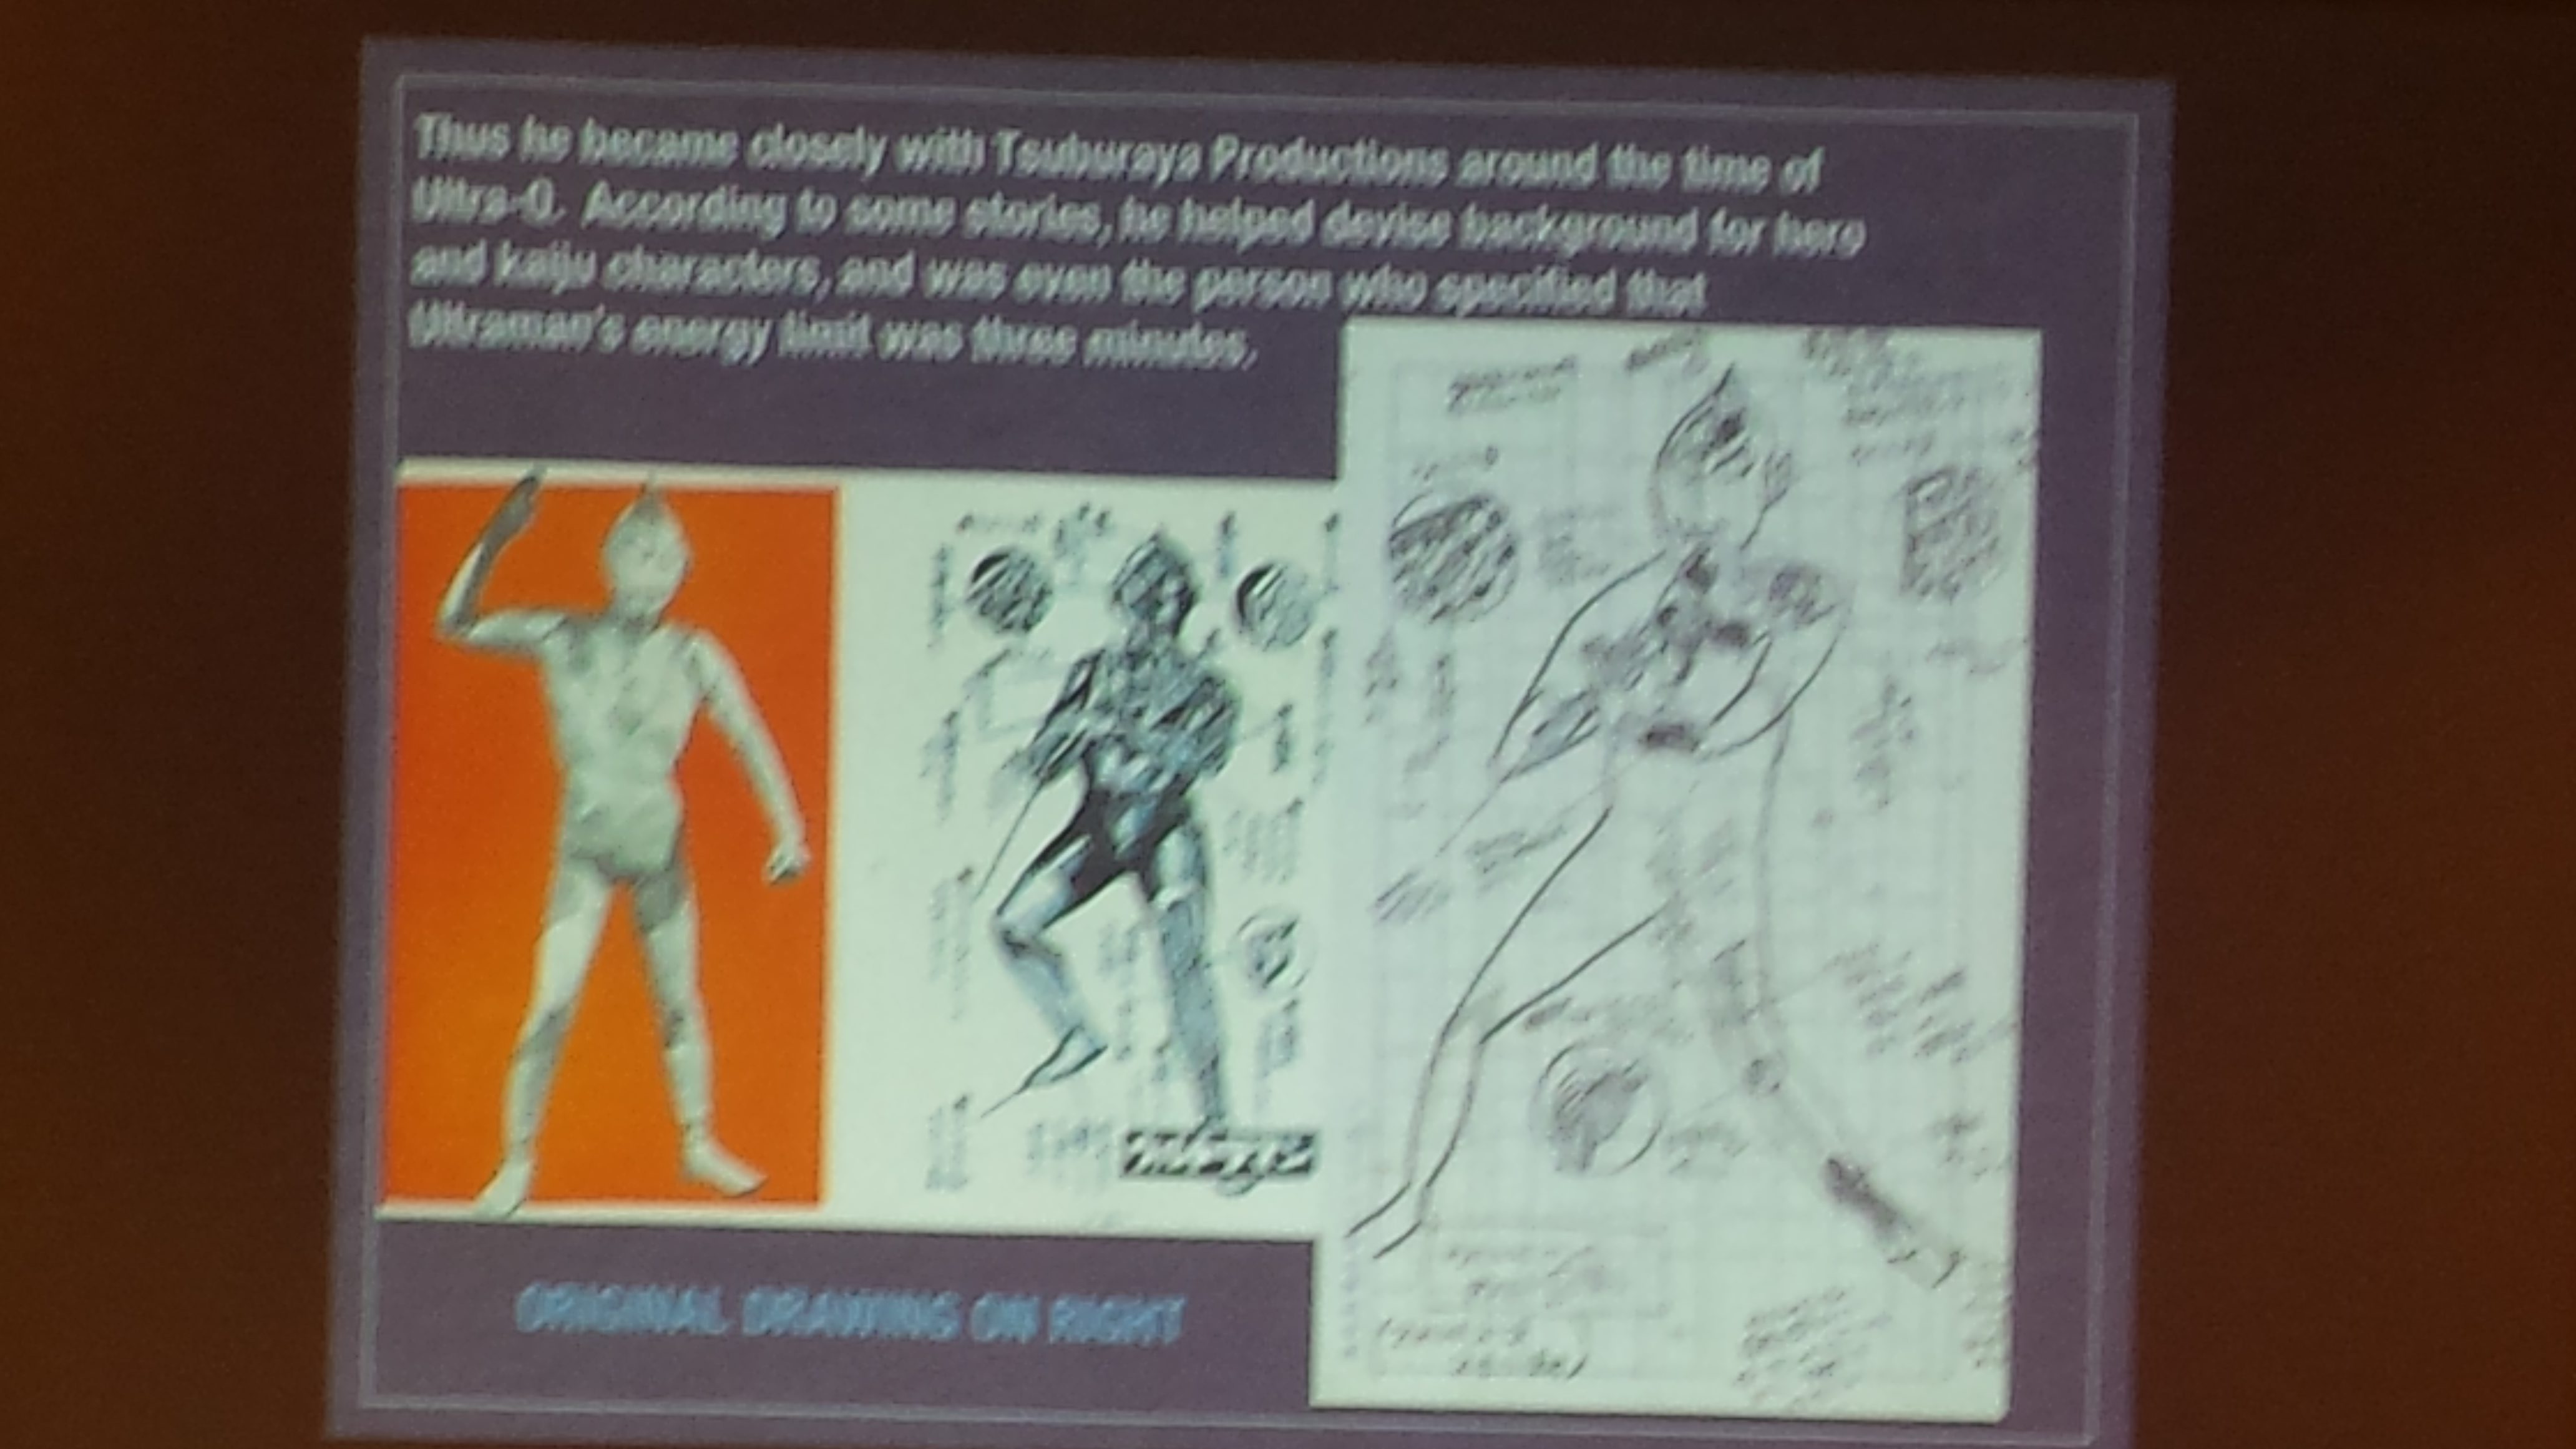 Original drawing and cross-sections for Ultraman, by Shoji Ohtomo